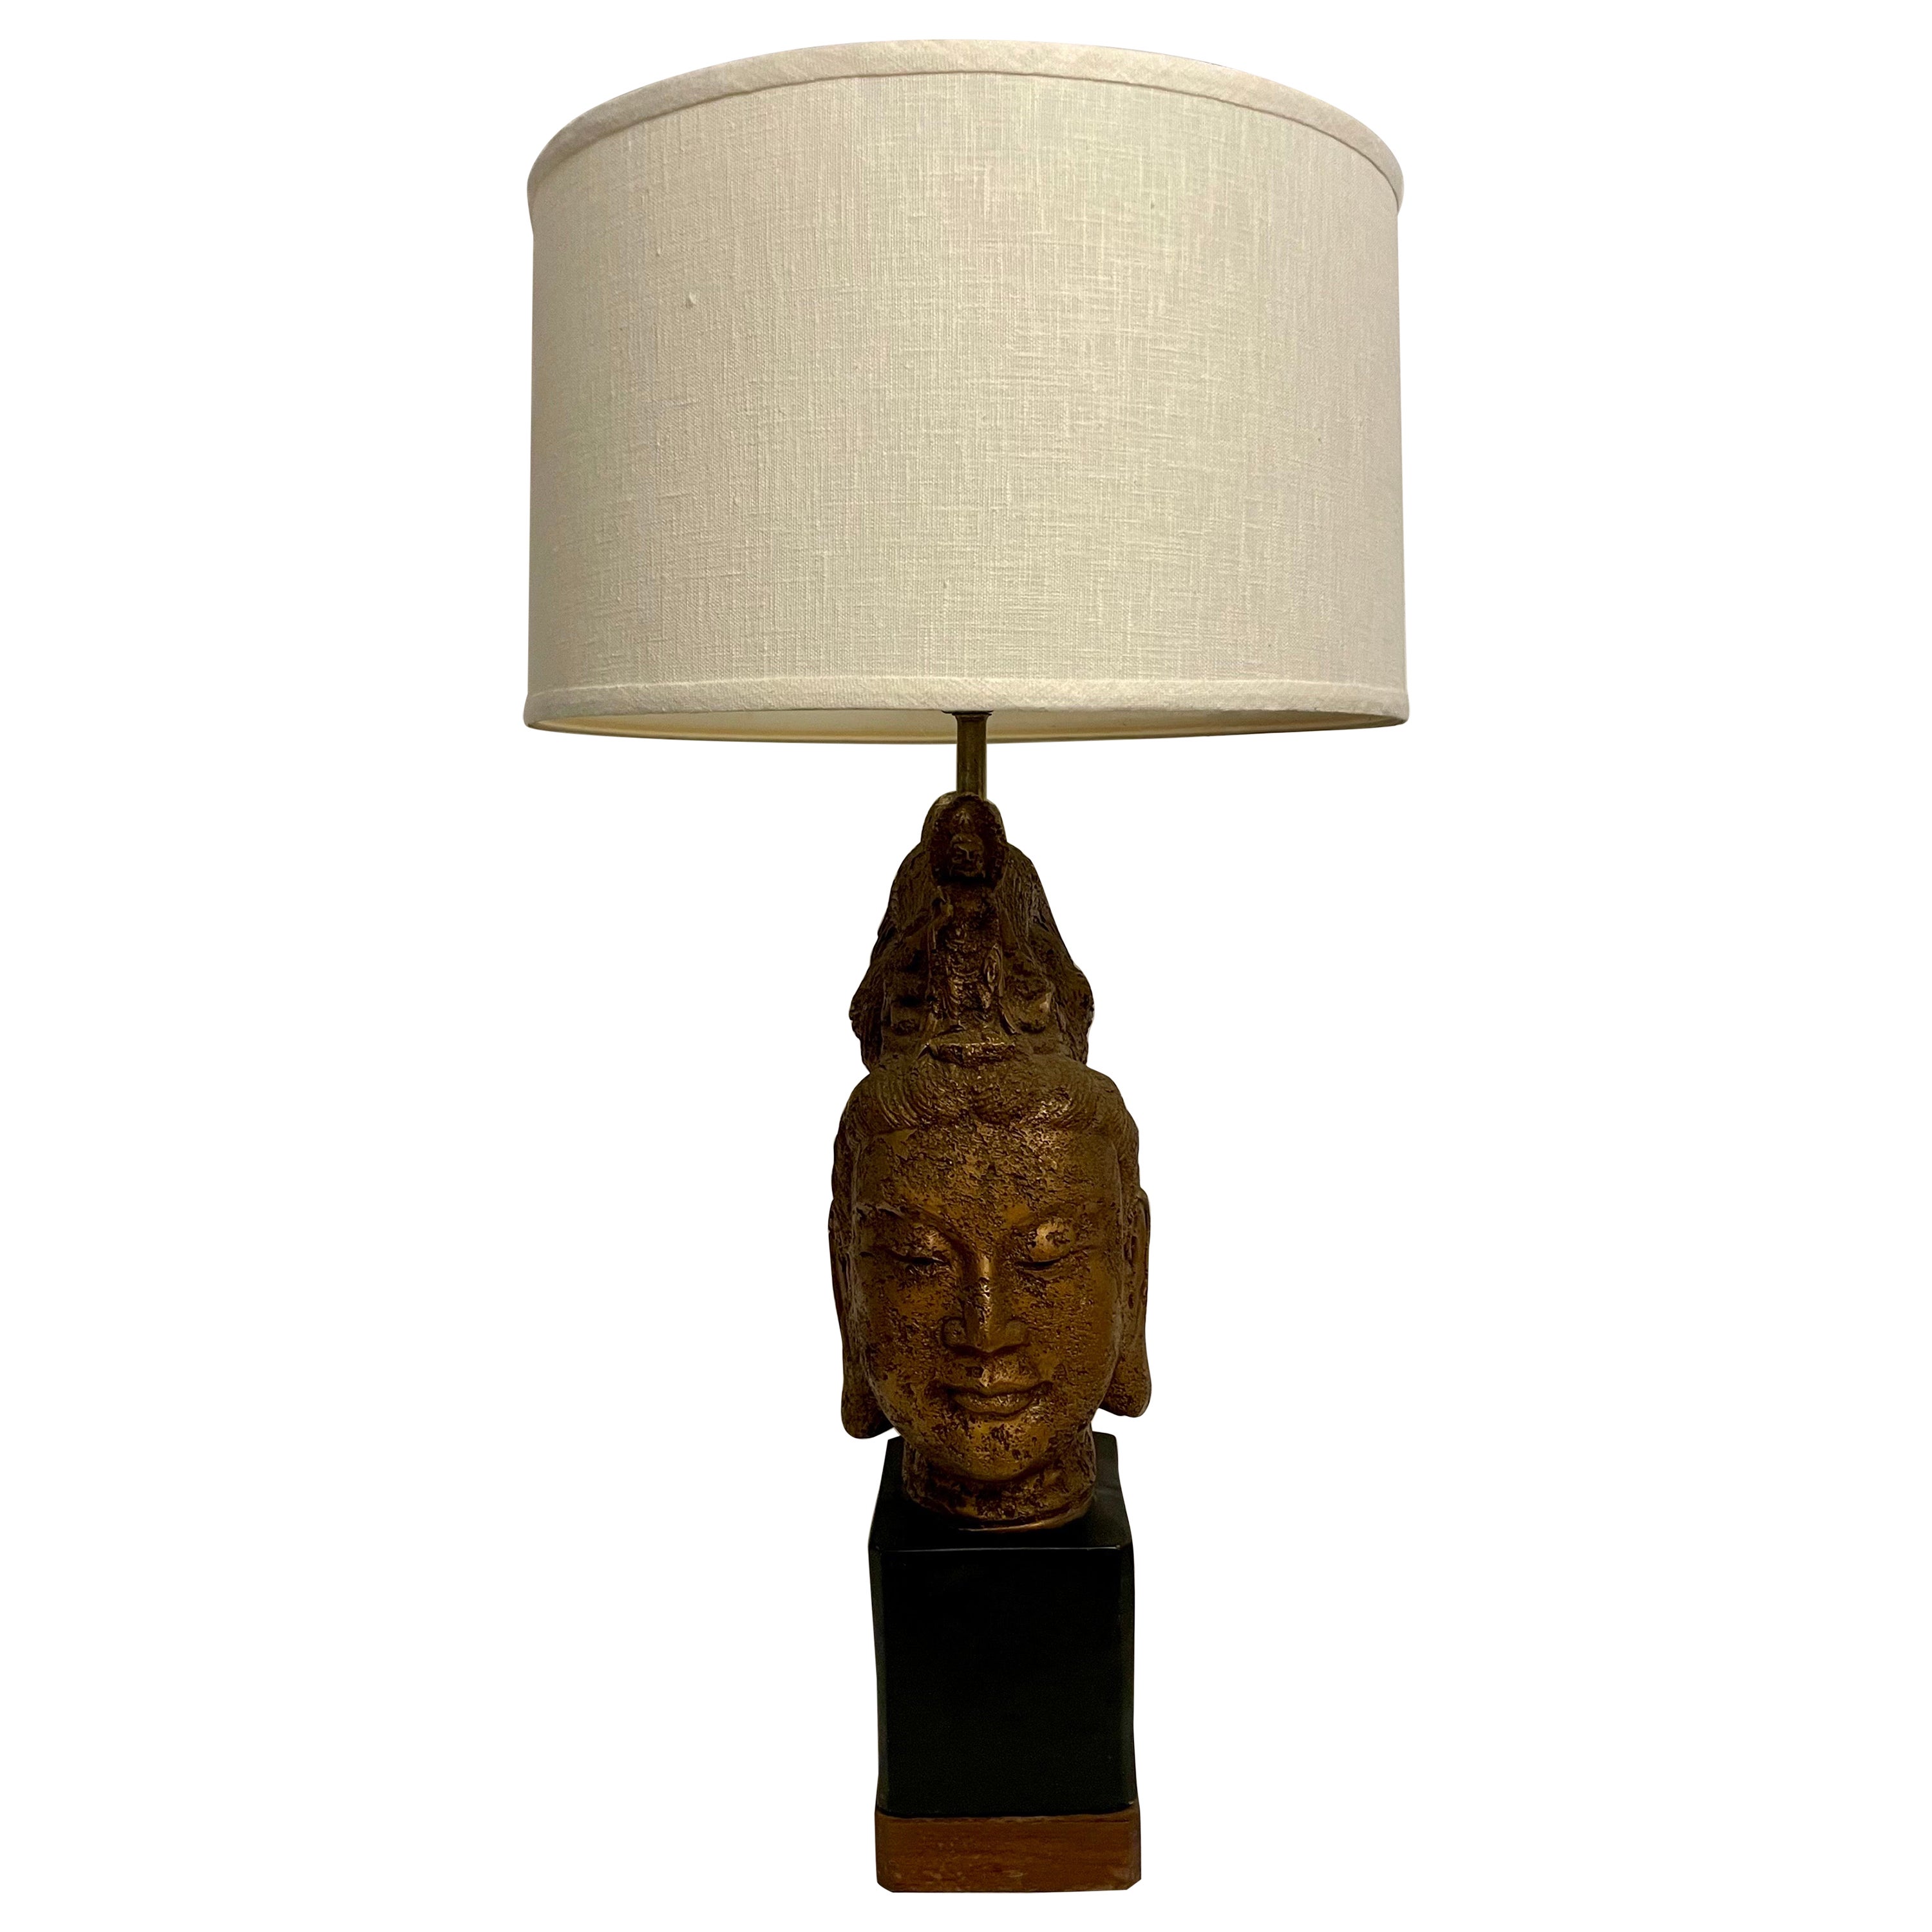 James Mont gold Buddha lamp the pieces are molded plaster with an antiqued, gold finish. And have polished brass hardware. Measures: 29